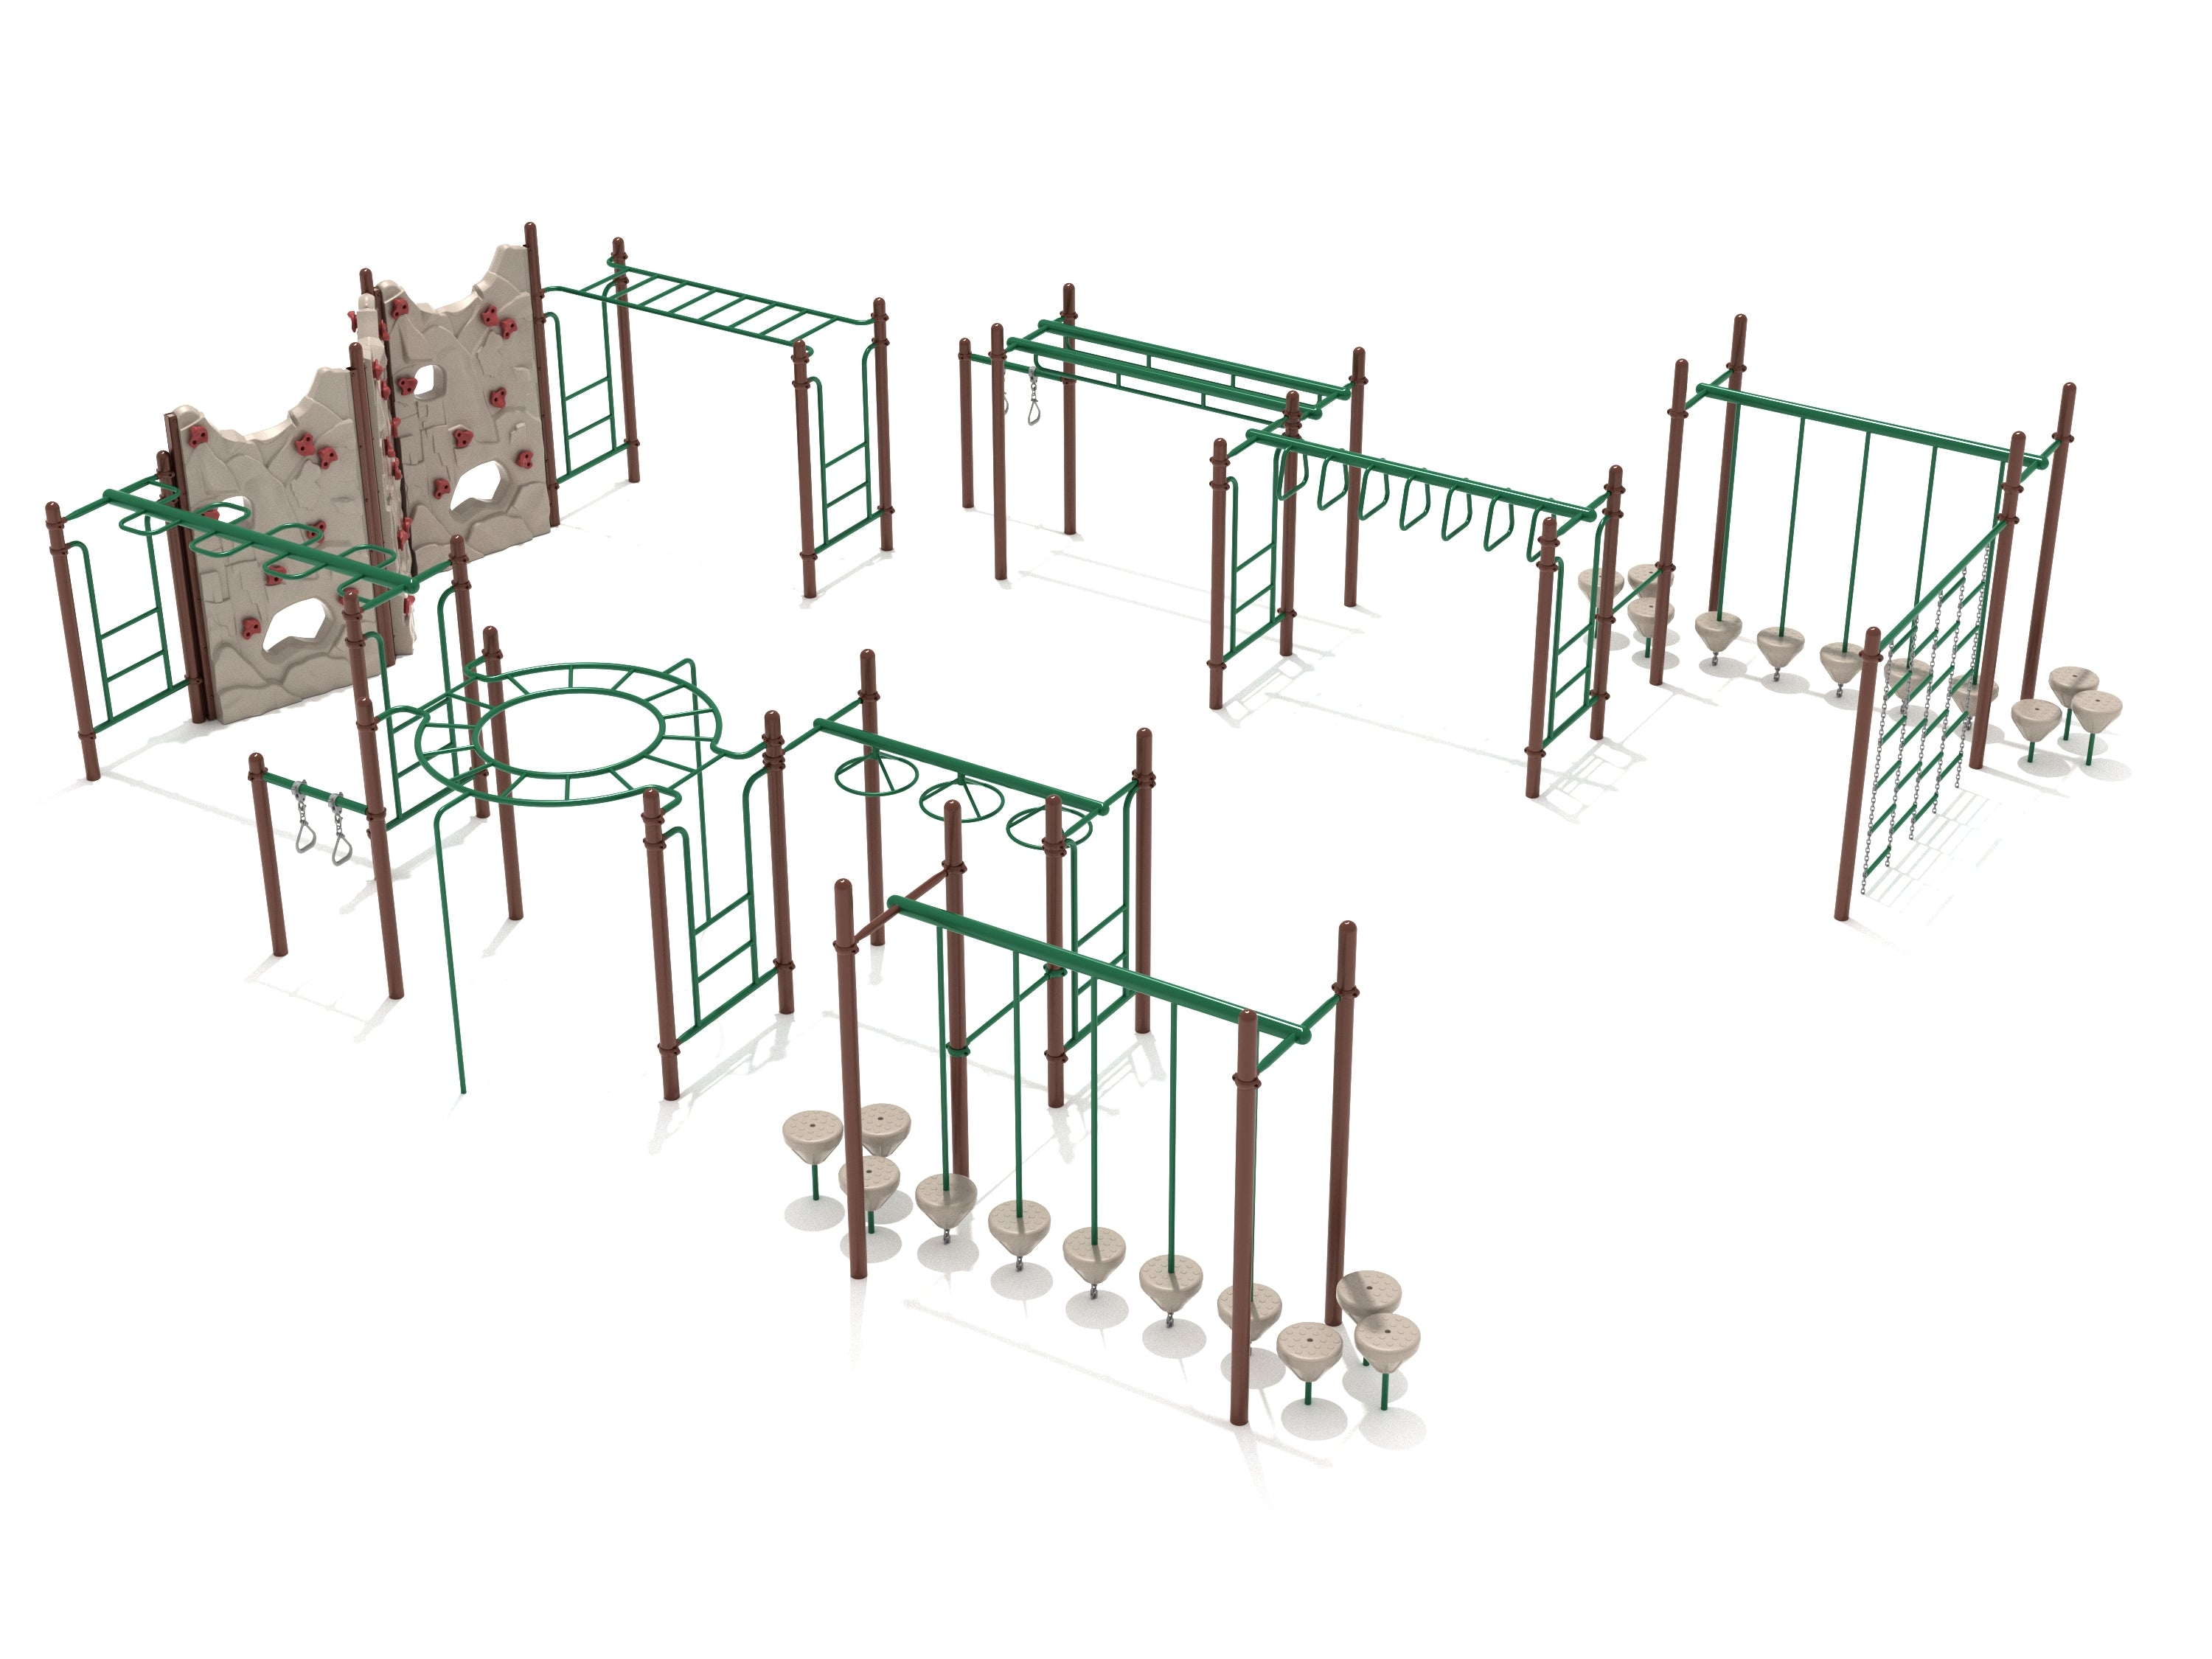 Rotonda Fitness Course Playground Neutral Colors